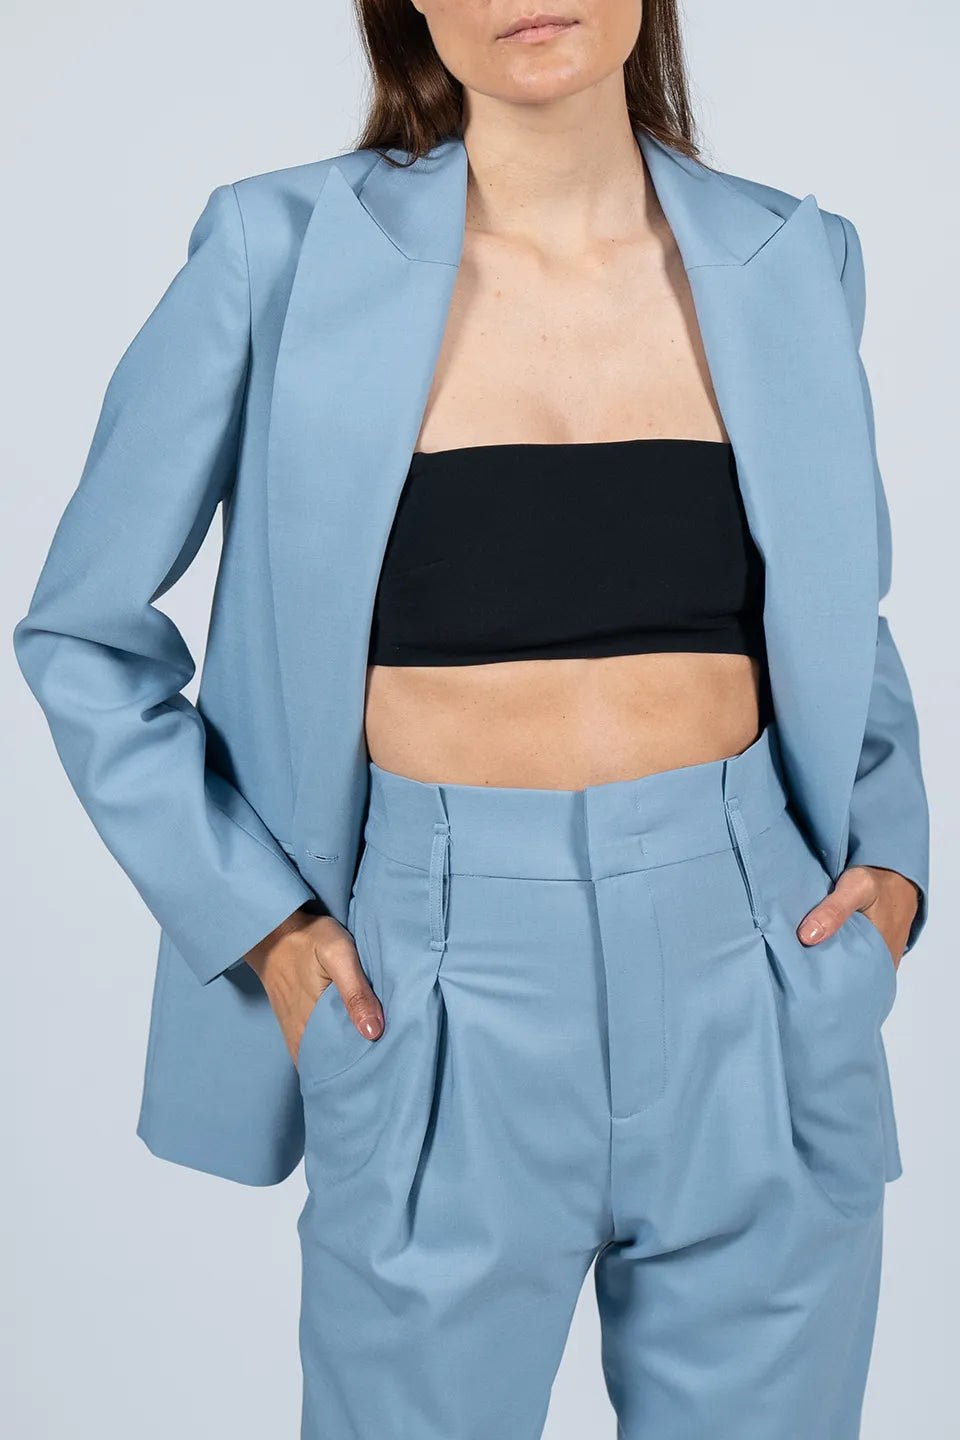 Designer Blue Women blazers, Jacket, shop online with free delivery in UAE. Product gallery 4